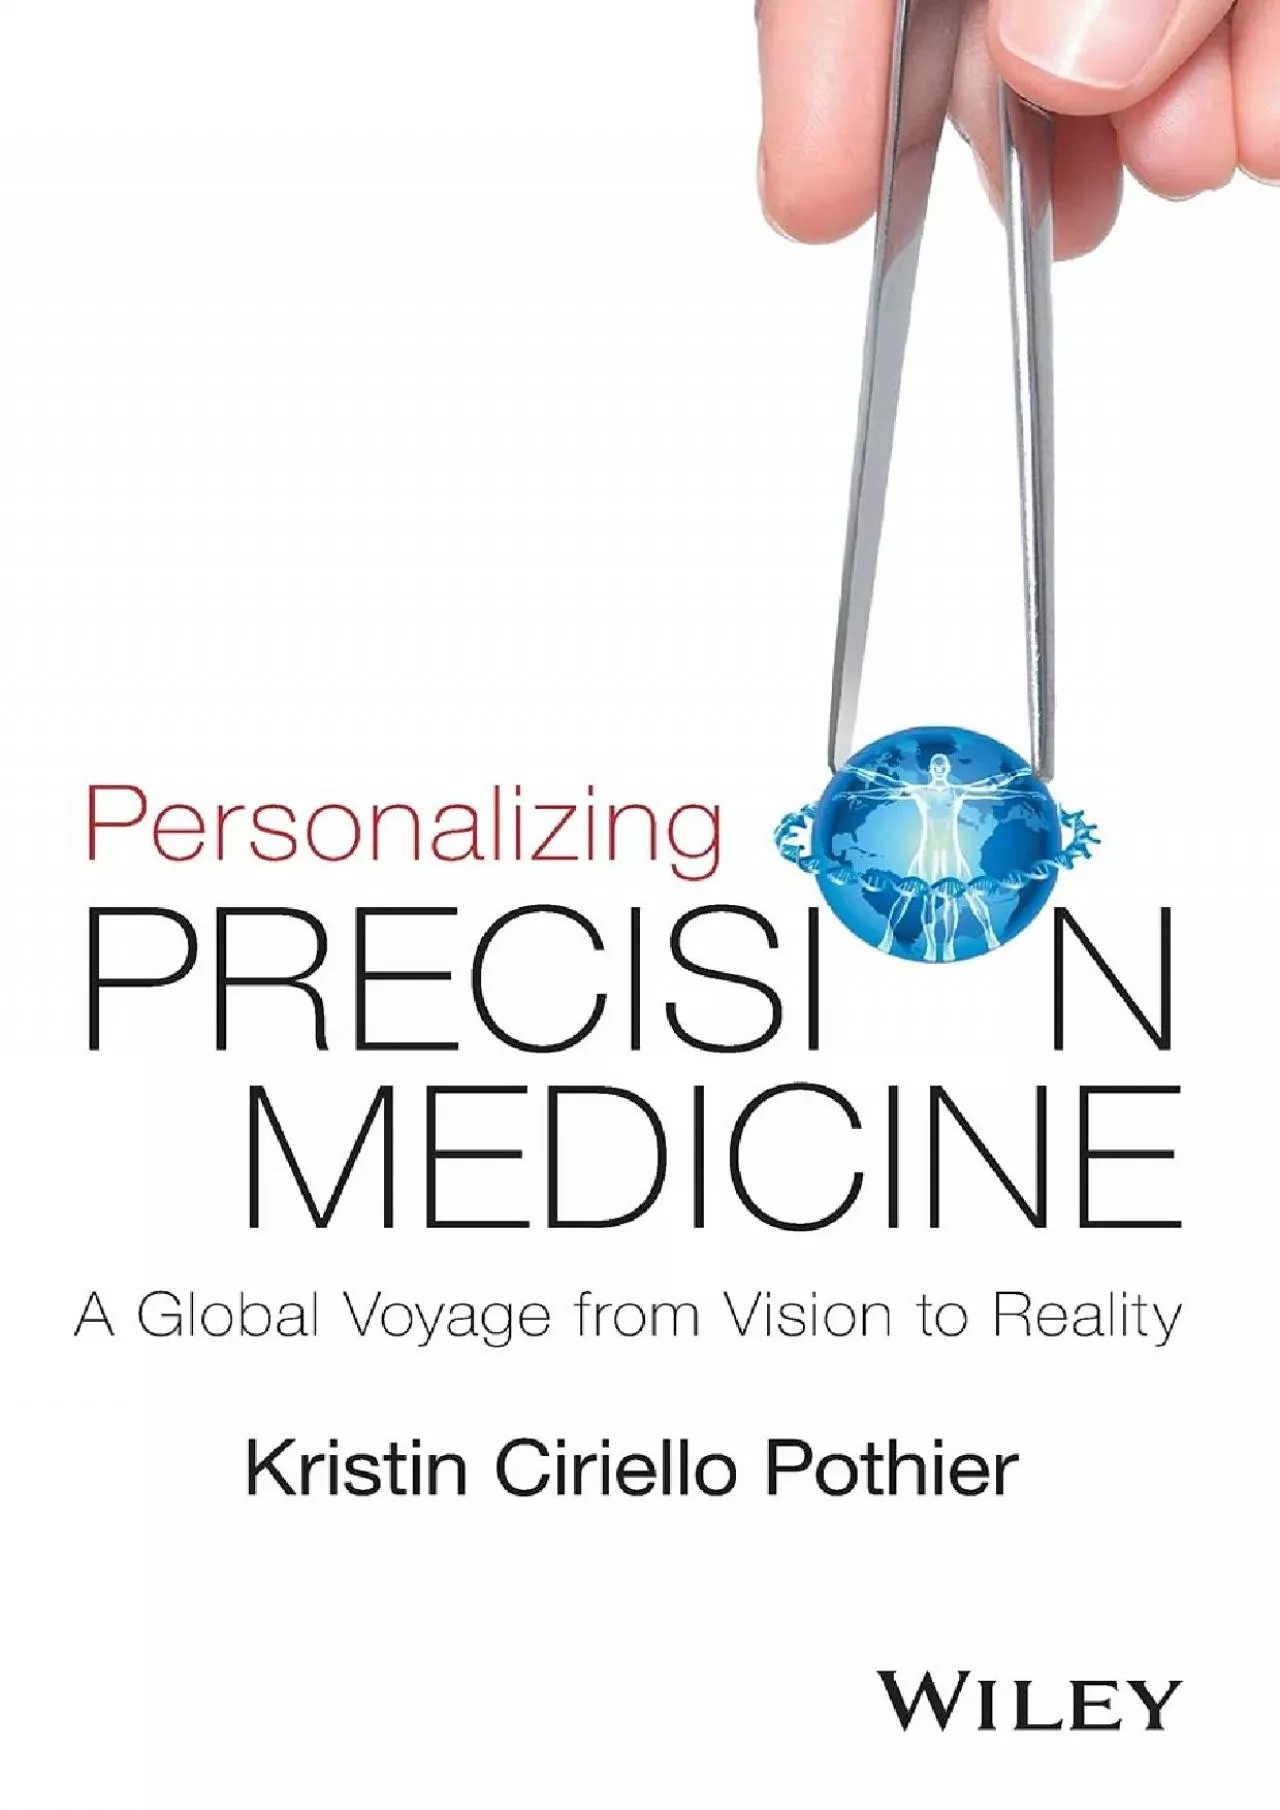 (BOOK)-Personalizing Precision Medicine: A Global Voyage from Vision to Reality